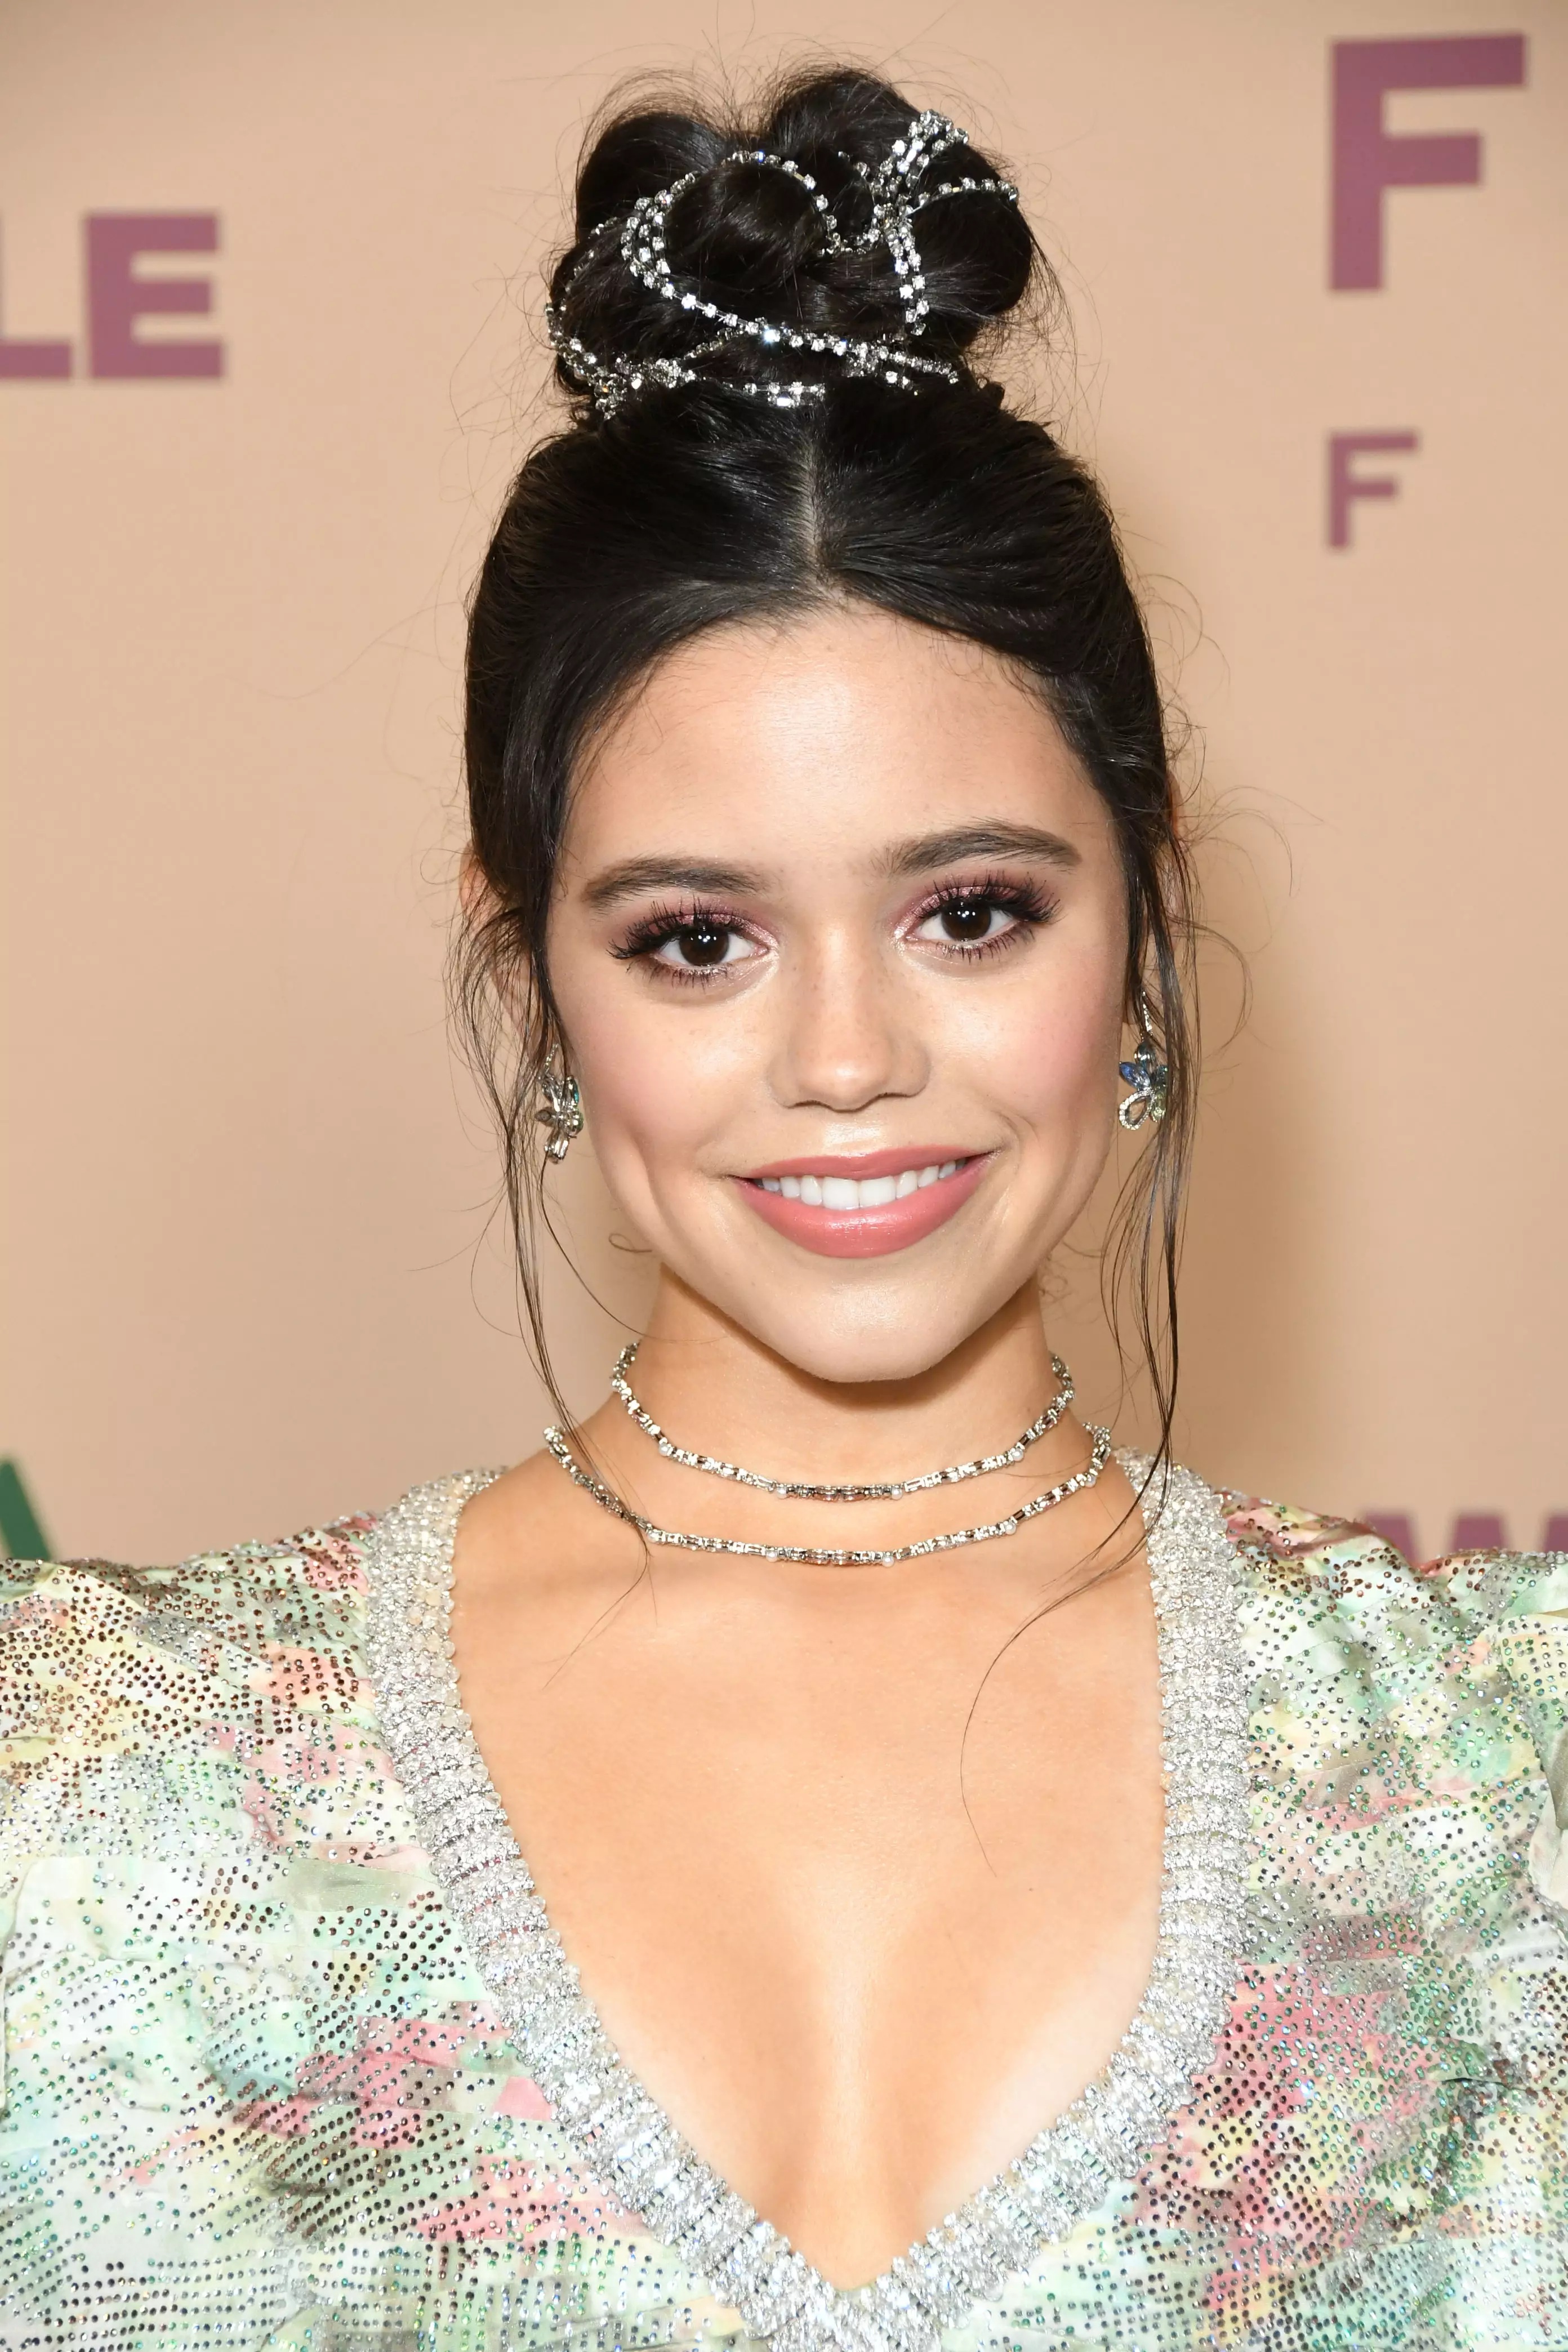 Jenna Ortega will be leading the show as Wednesday Addams (